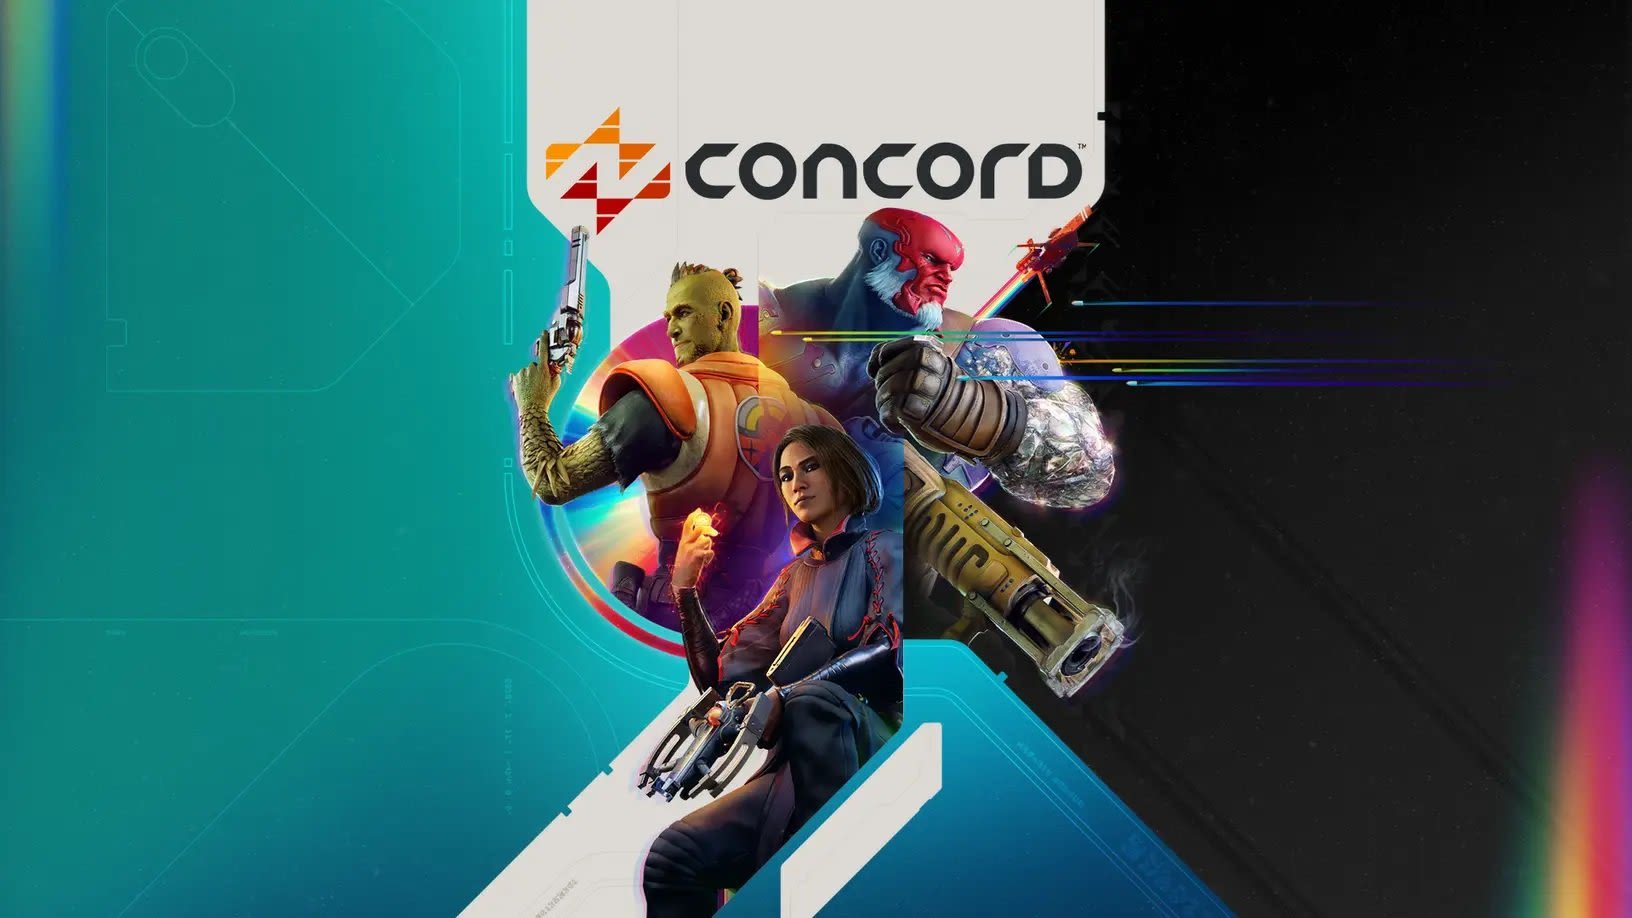 It looks like PlayStation’s new shooter Concord could be priced at $40 | VGC